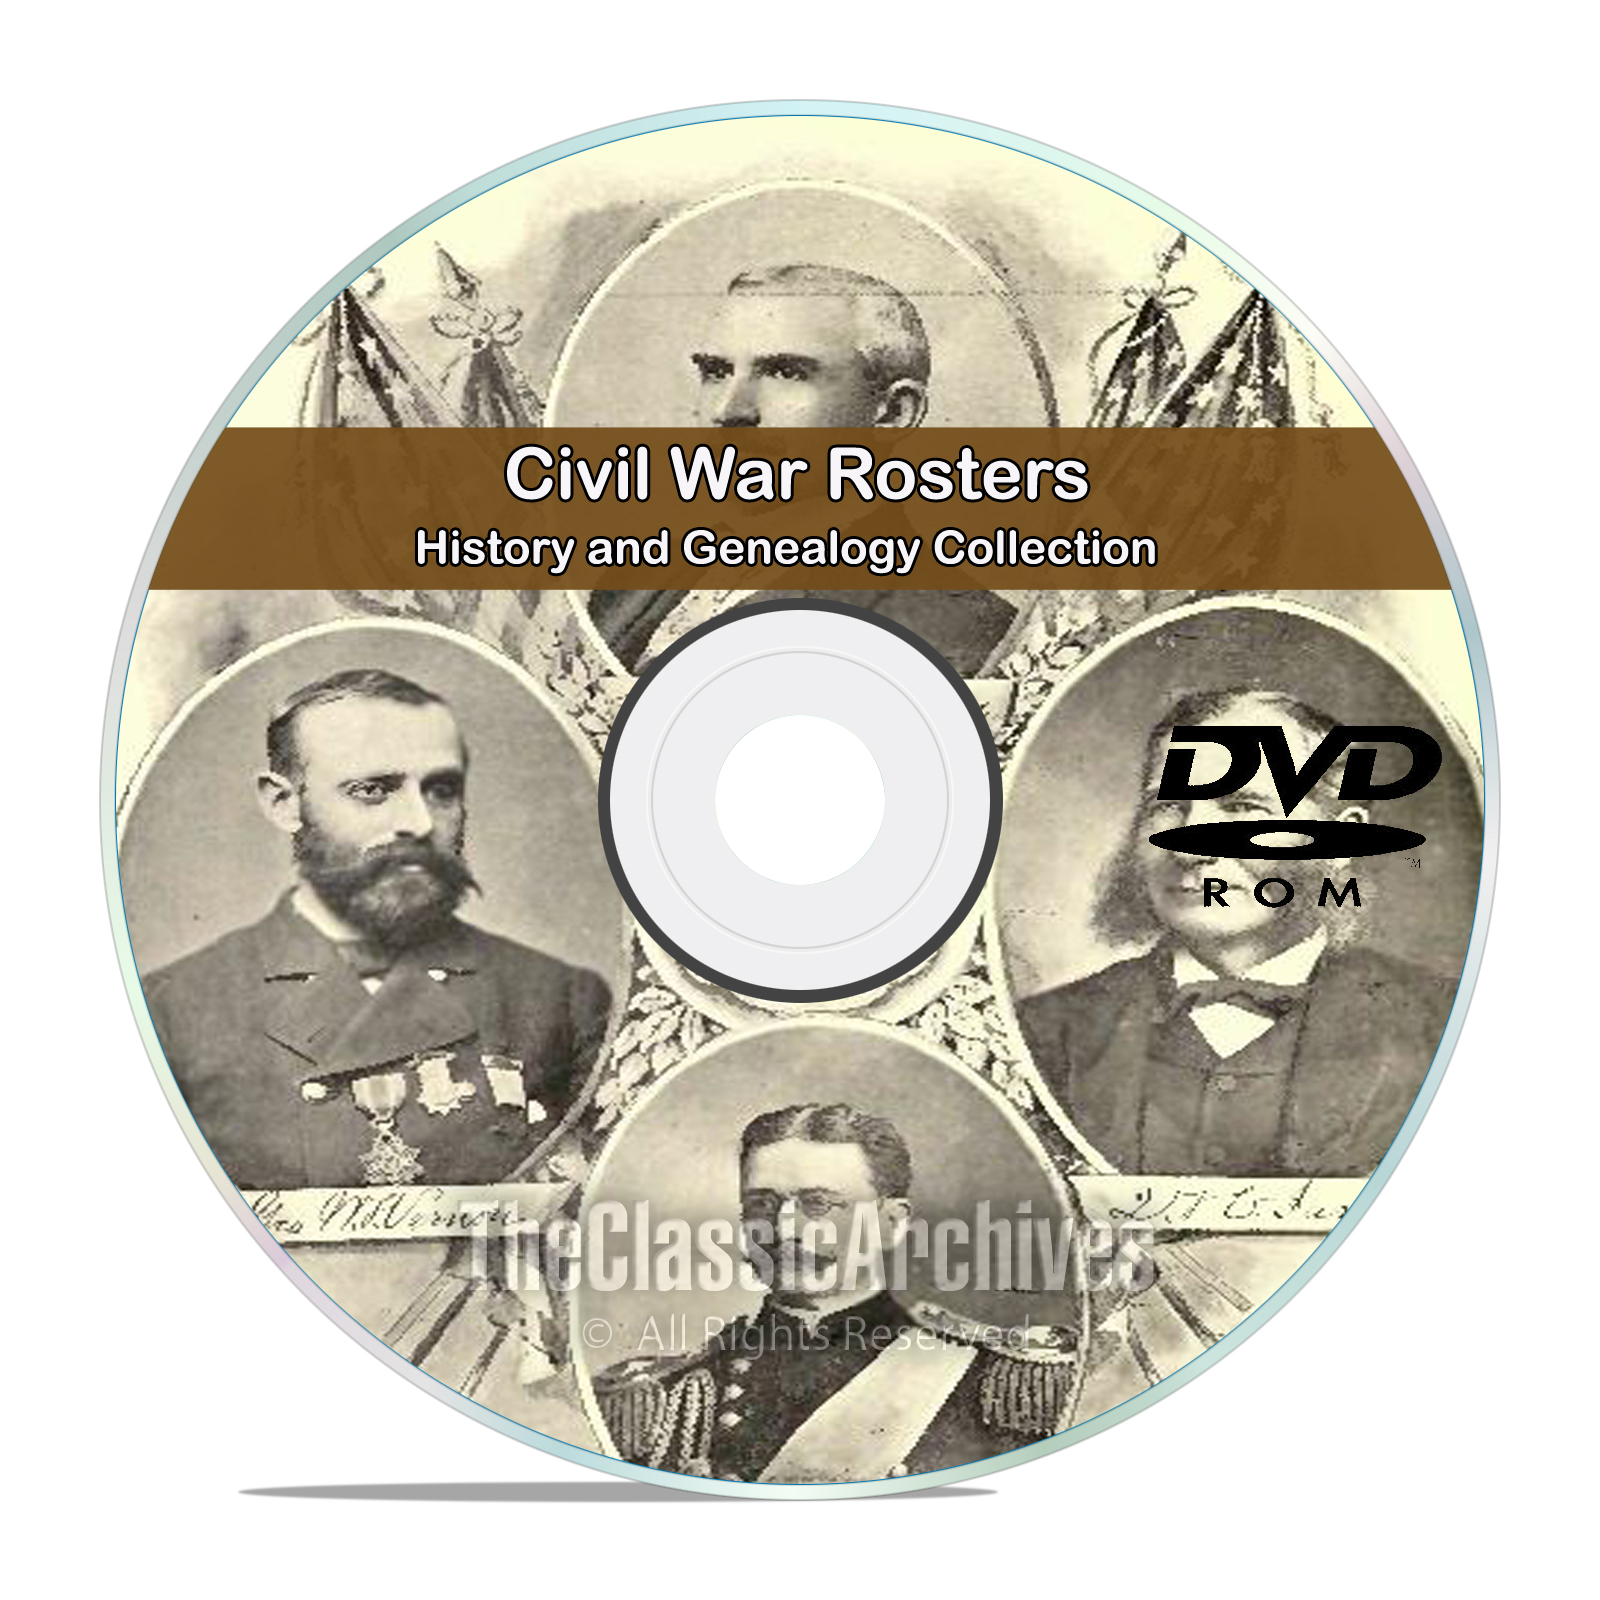 Civil War Rosters, 77 Classic Books, History and Genealogy, Names on DVD